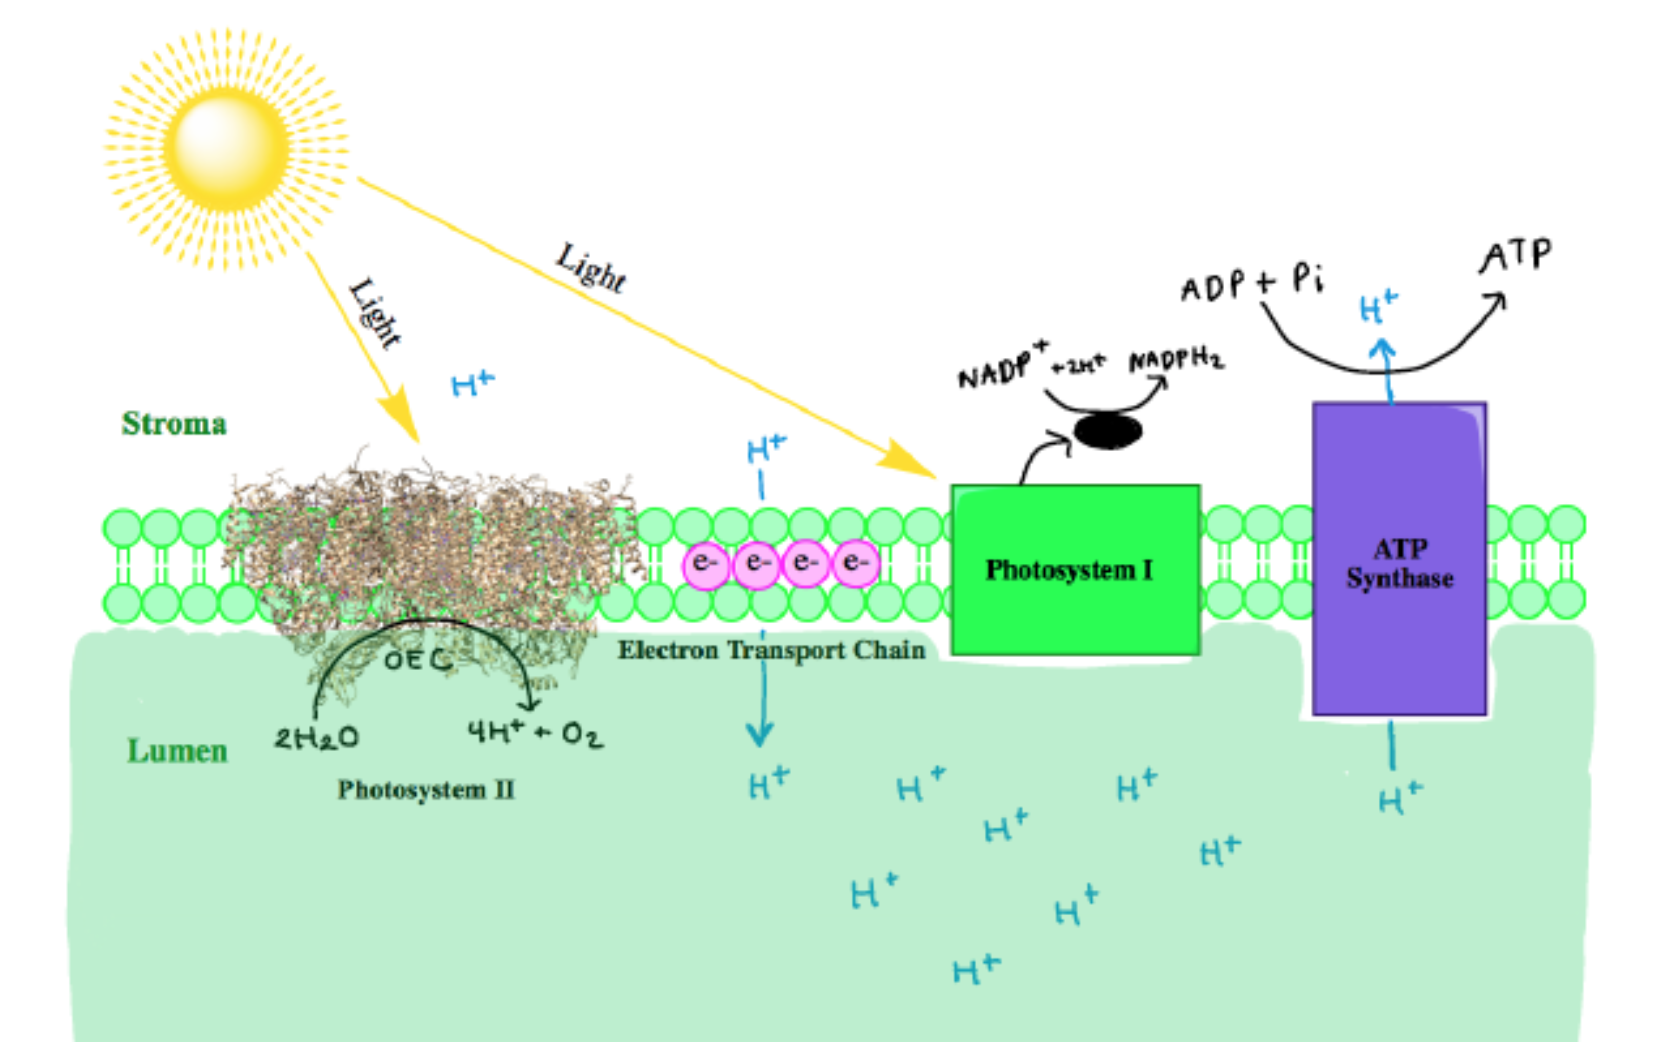 Figure showing transfer of energy involved in photosynthesis, highlighting photosystems II being embedded in the membrane